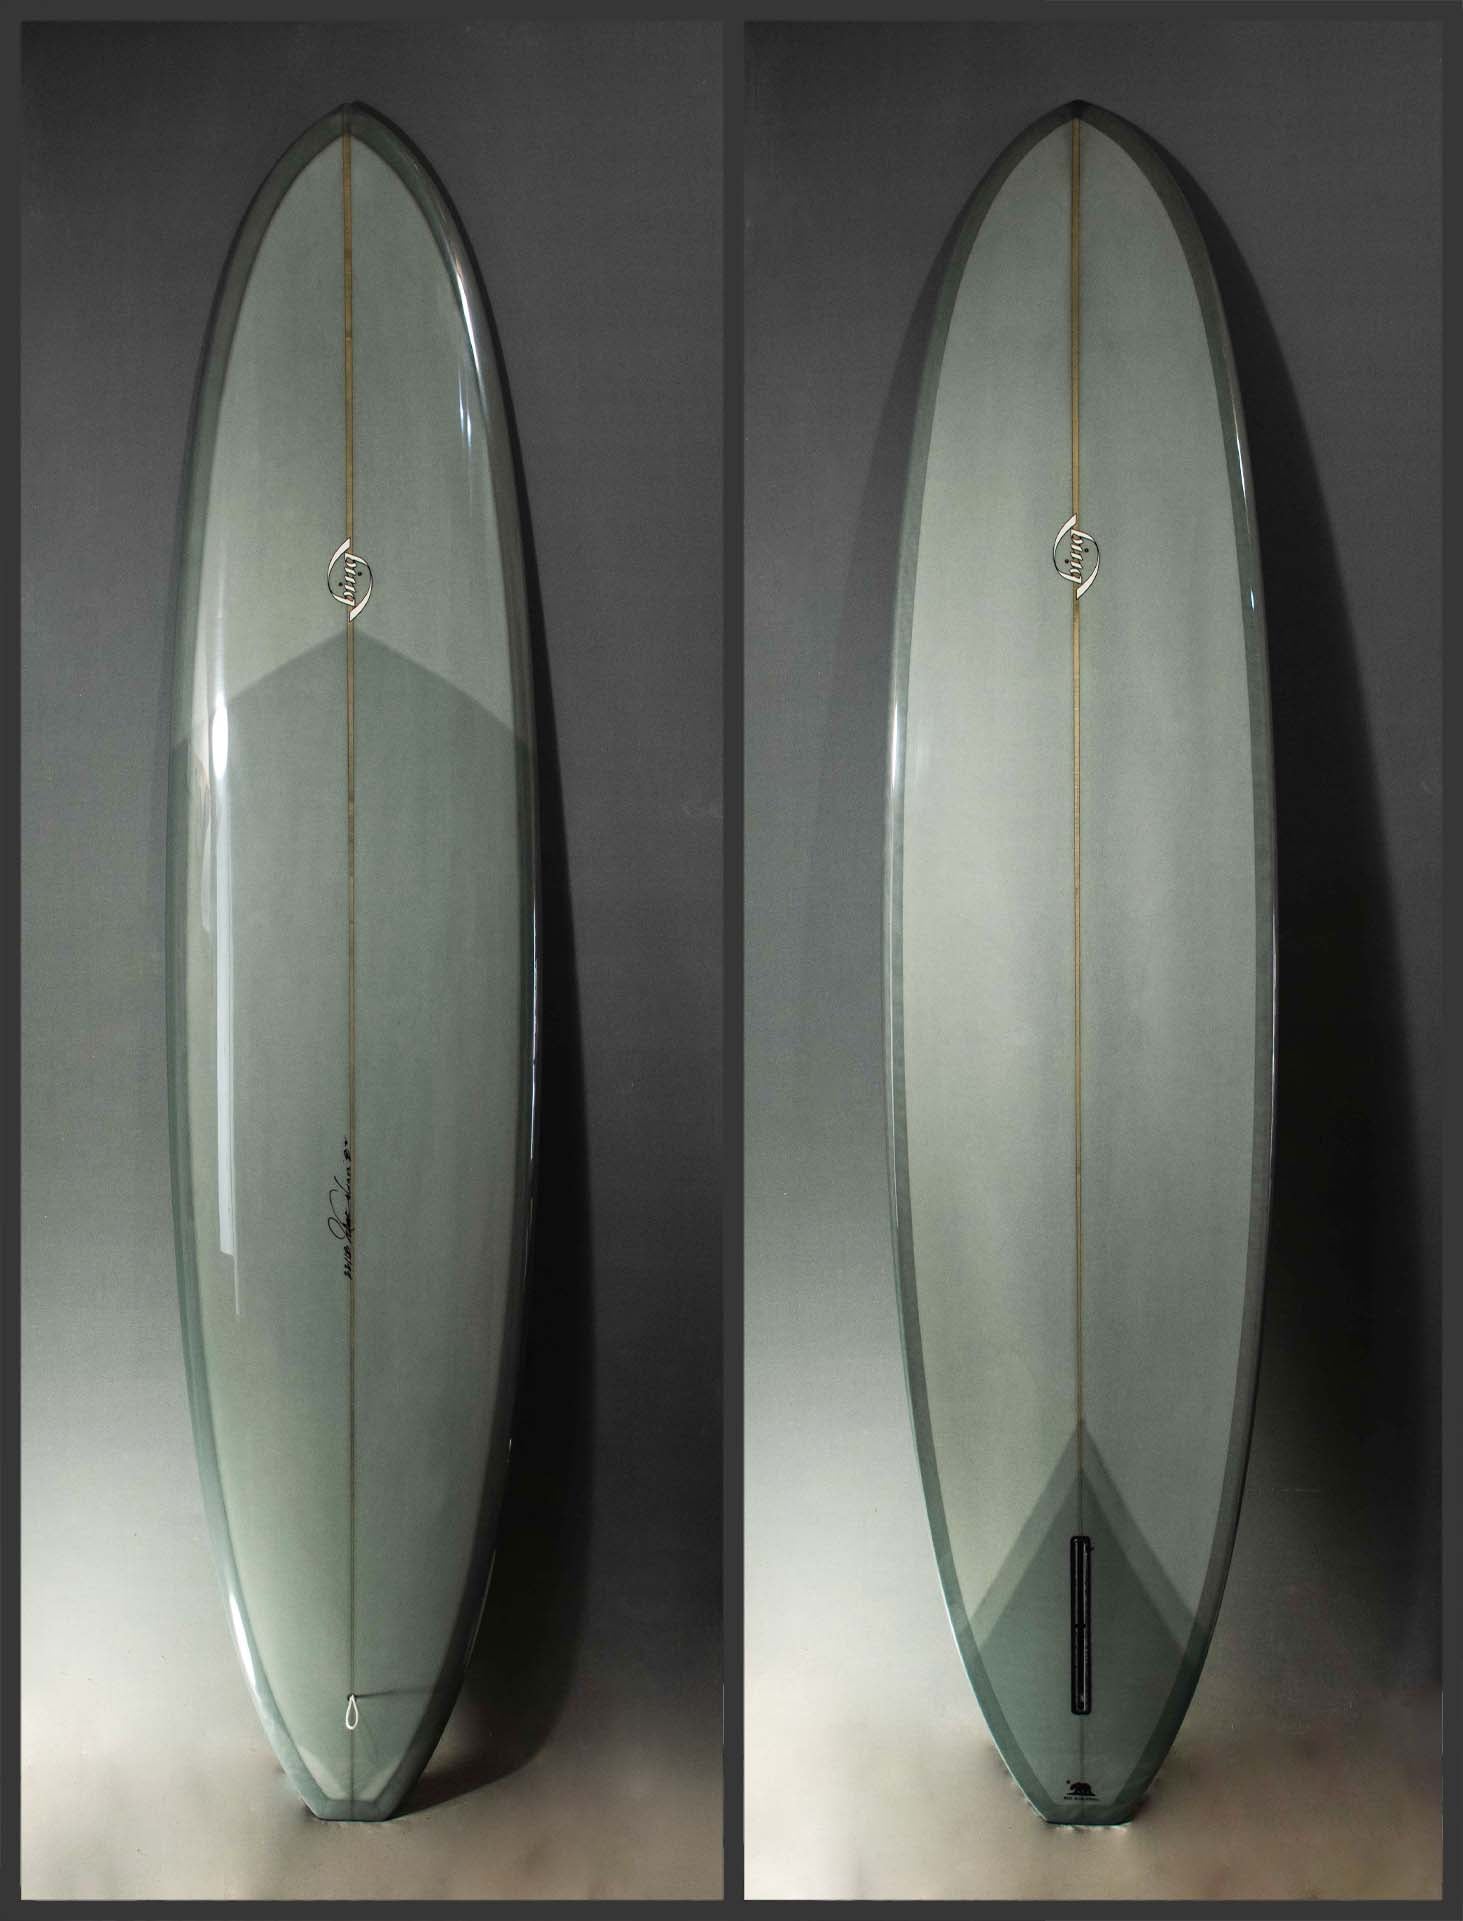 Midlengths In Stock - Bing Surfboards